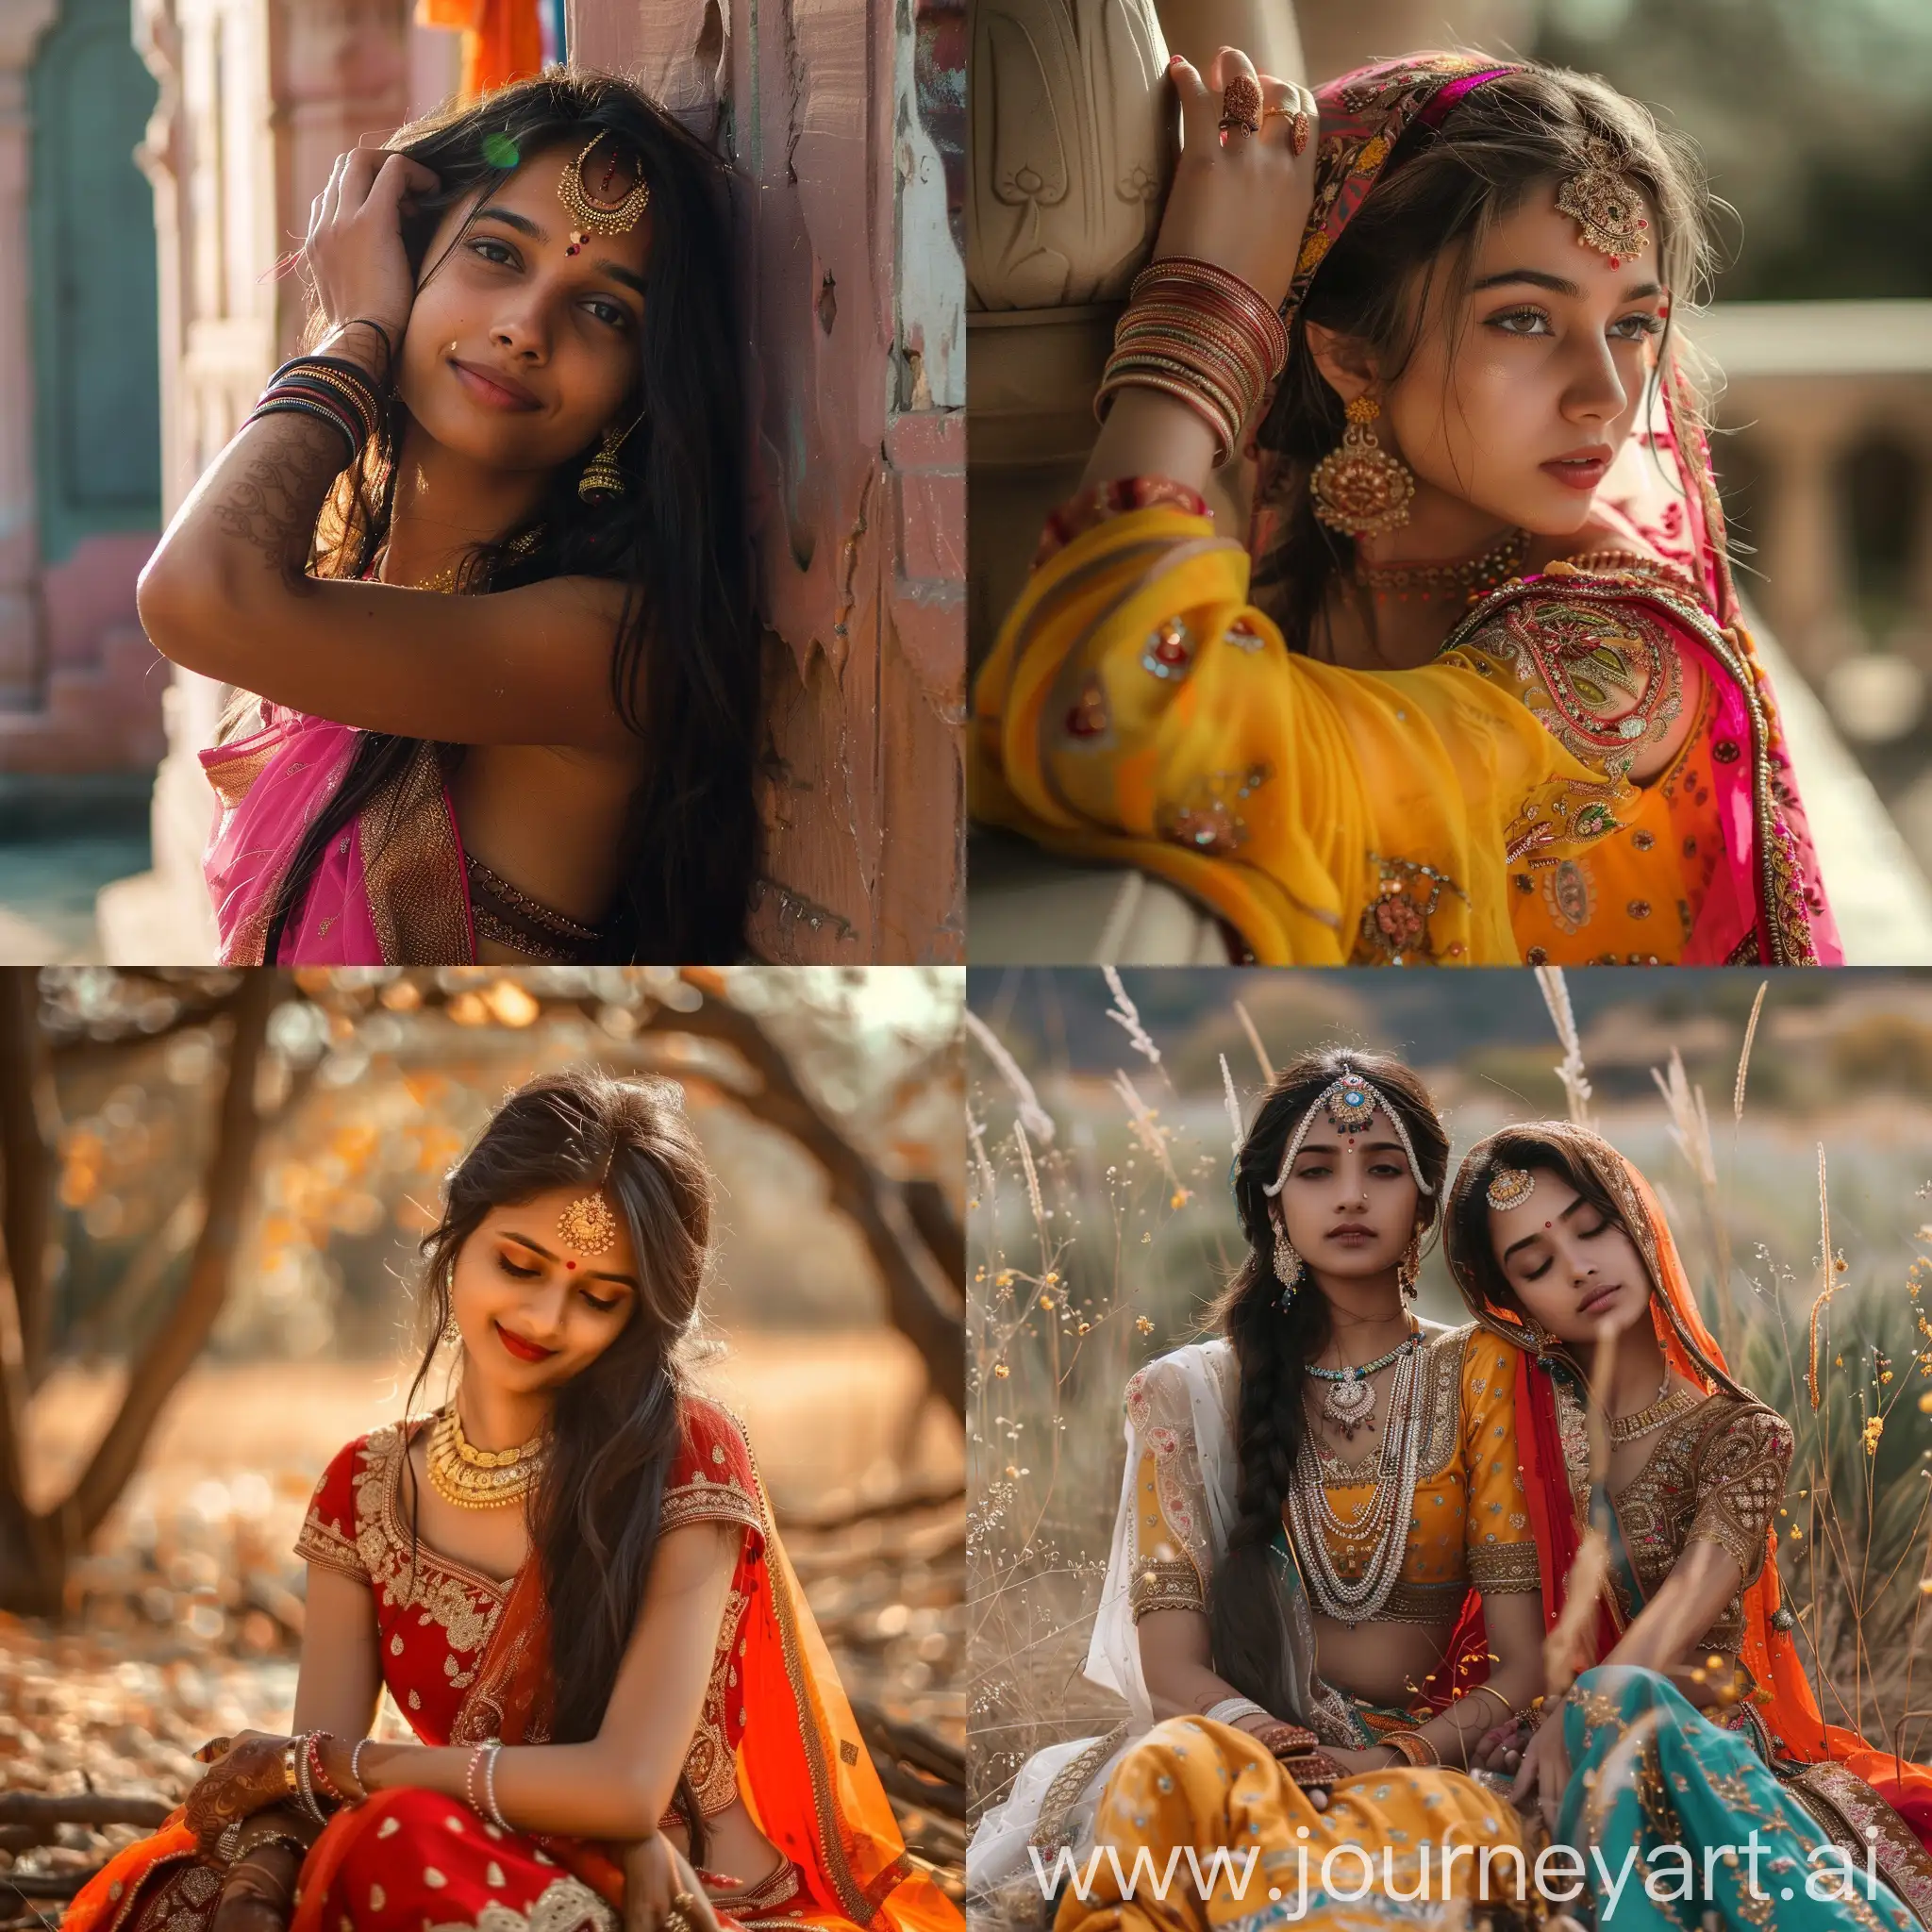 Romantic-Poses-of-Indian-Girls-Vibrant-Cultural-Expressions